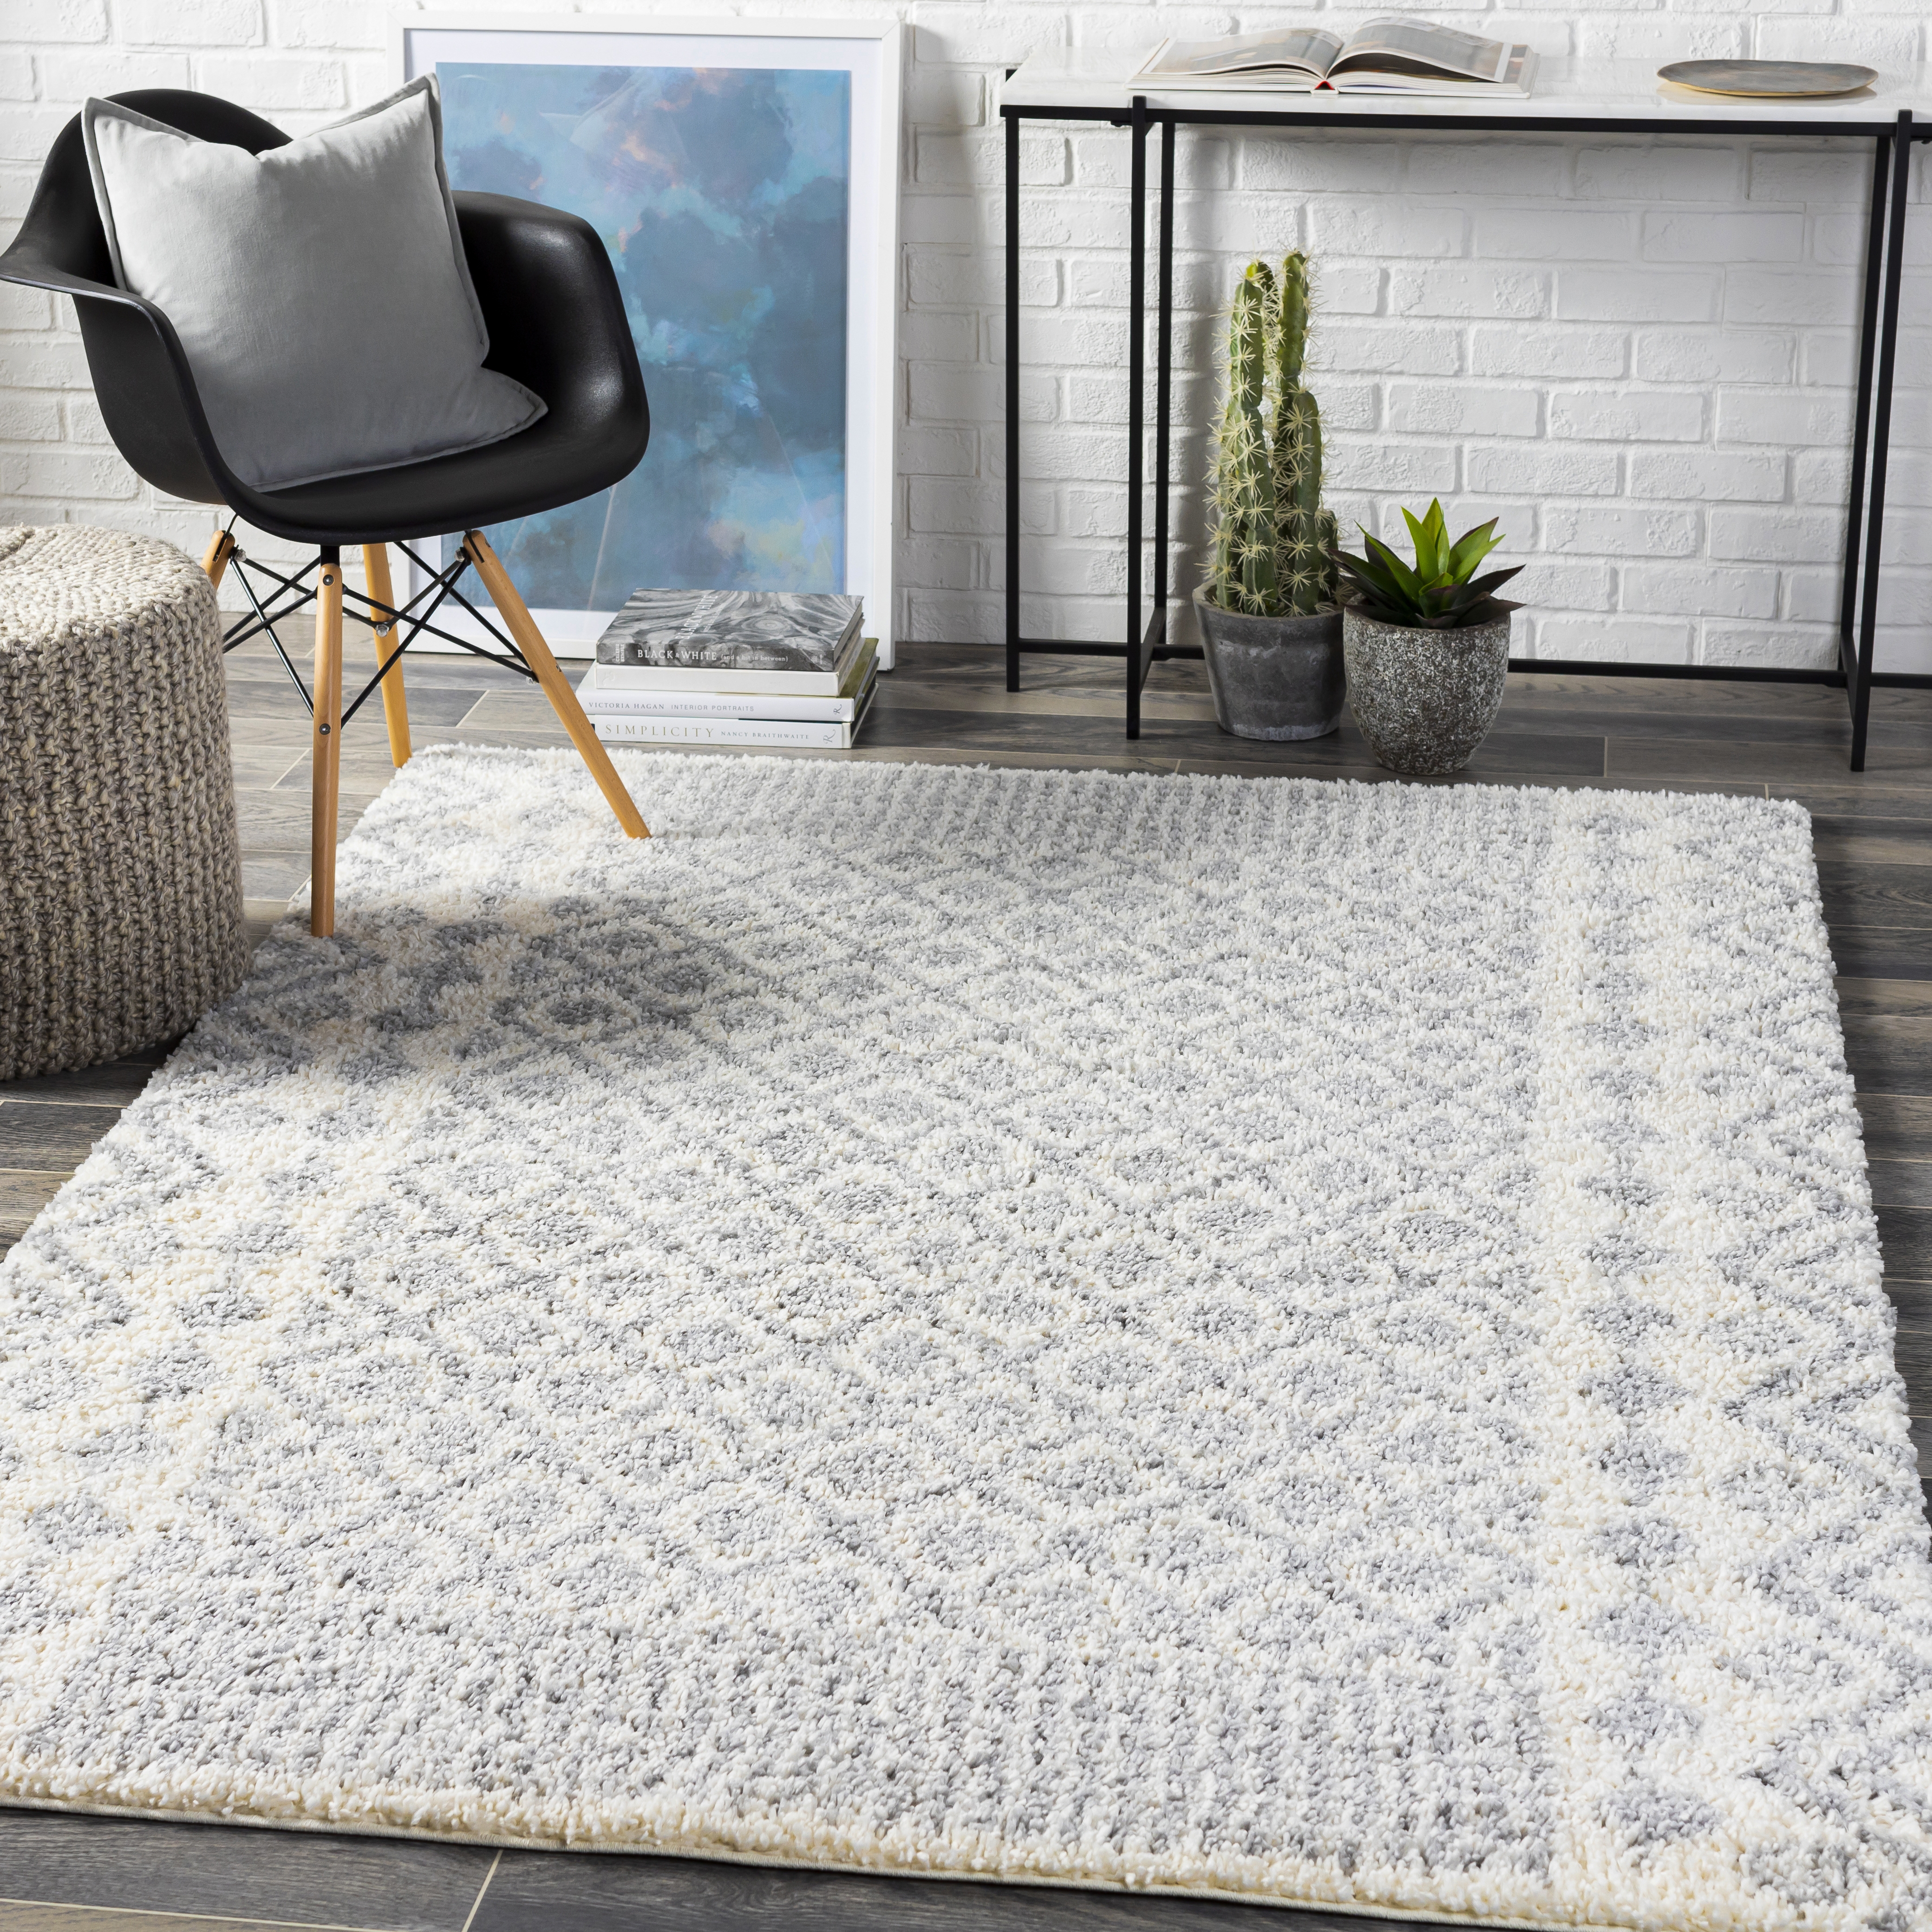 Deluxe Shag Rug, 7'10" x 10'3" - Image 1